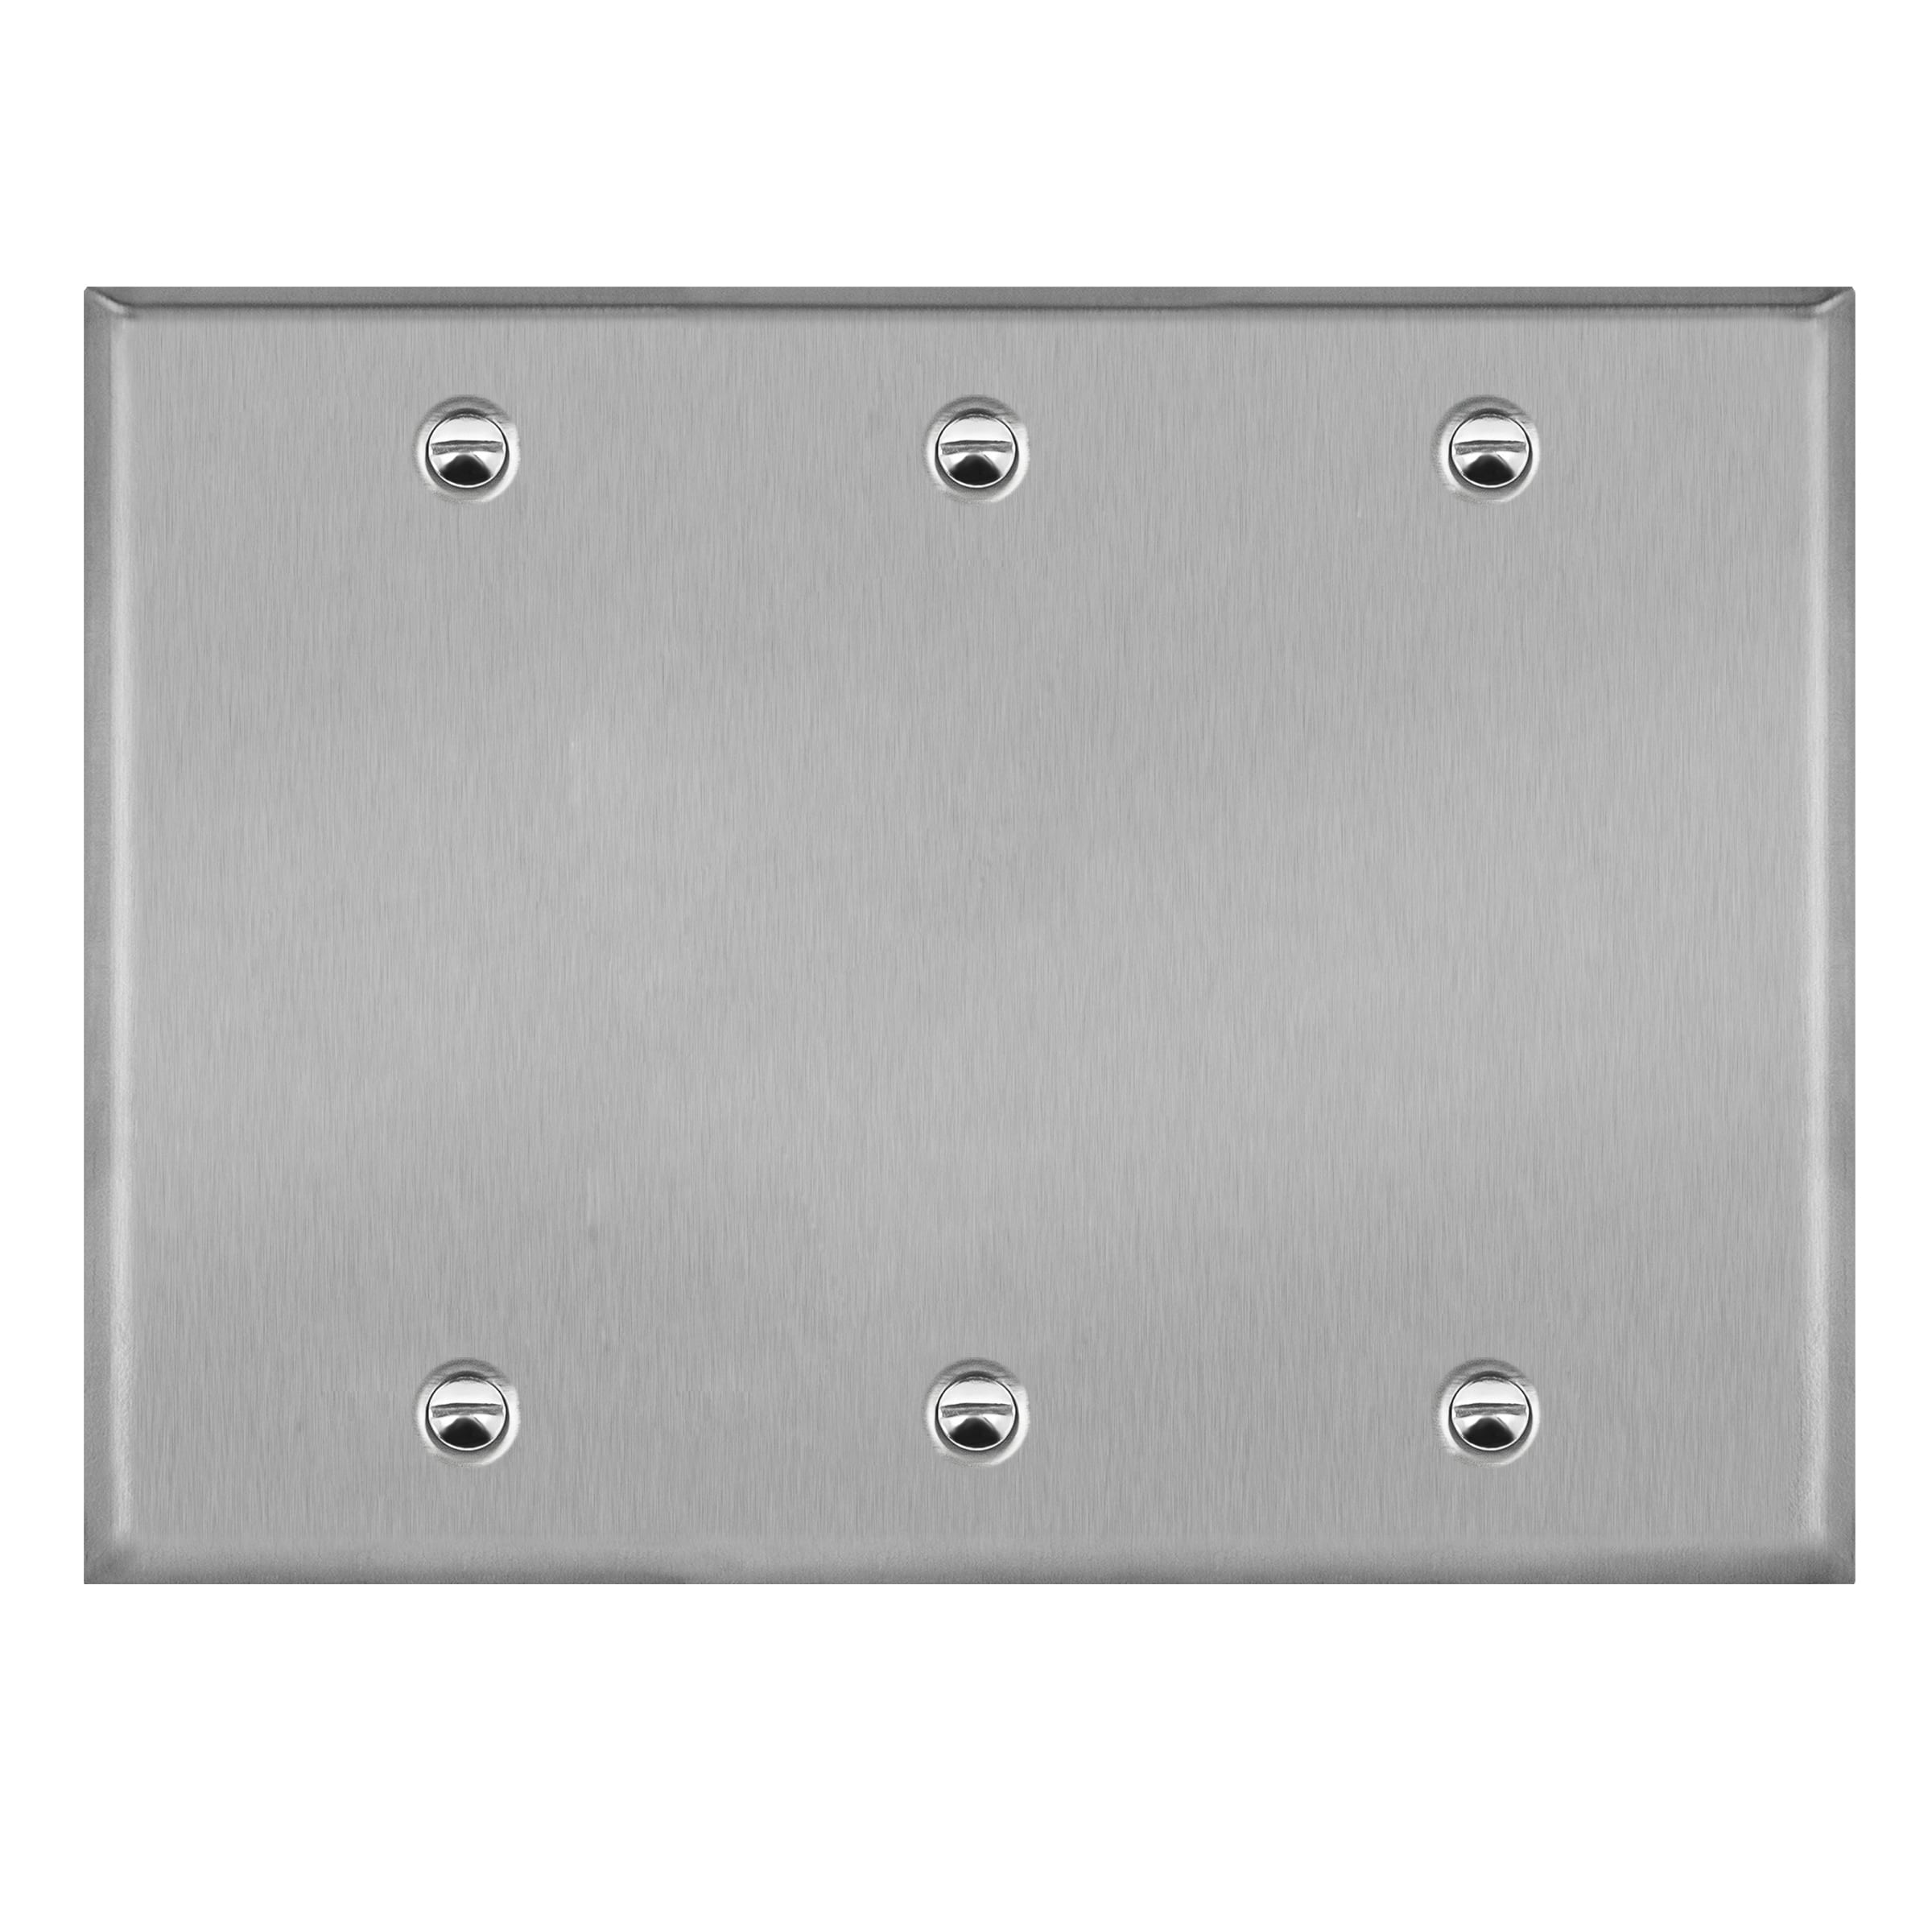 BLANK STAINLESS STEEL WALL COVER PLATE 1 2 3 4 GANG 